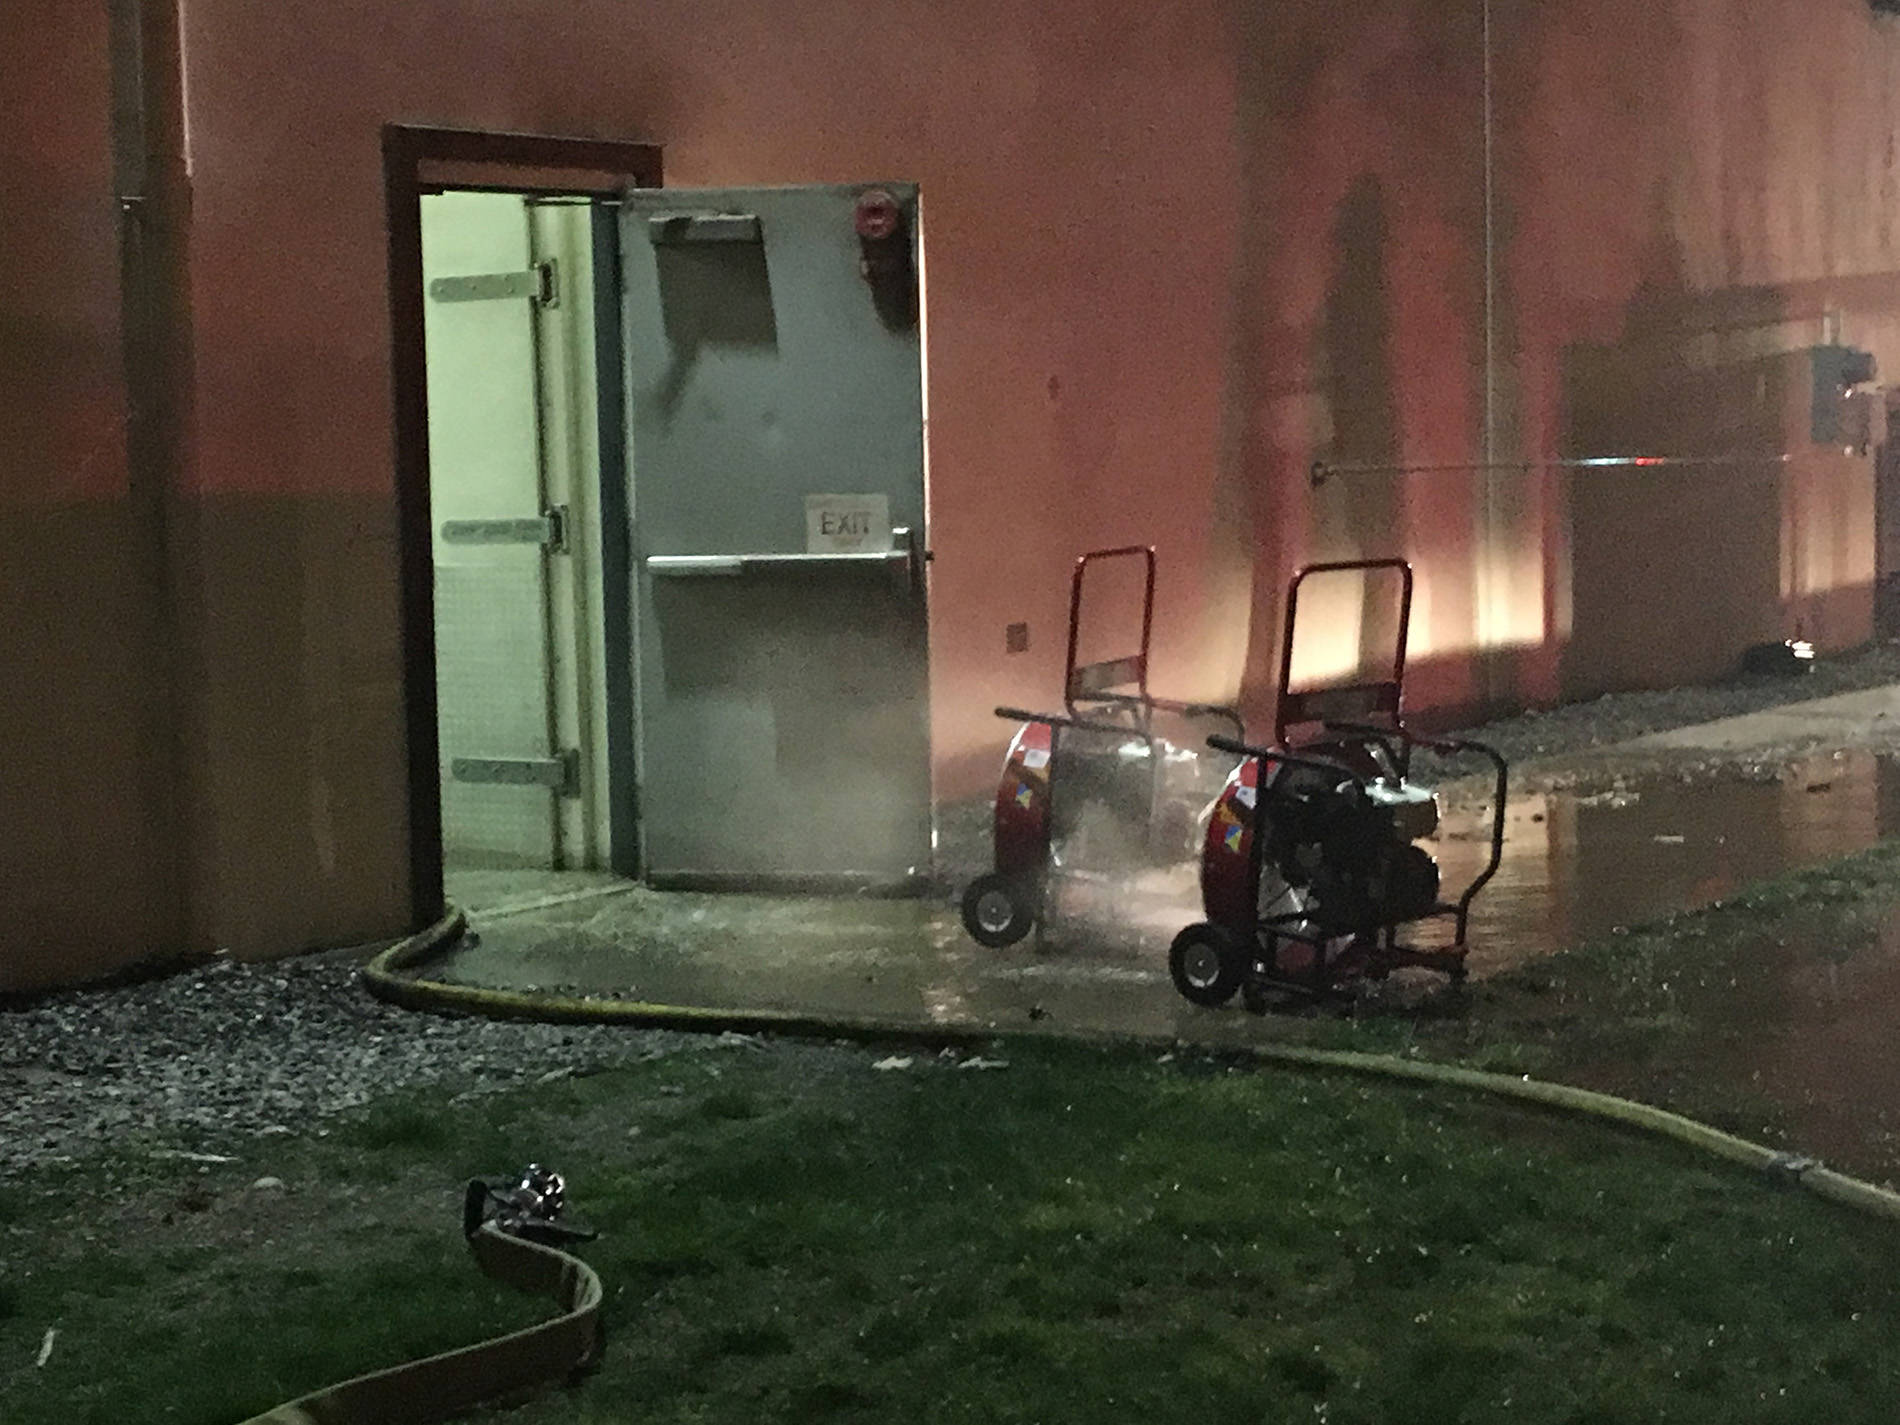 Area firefighters extinguished a deep fryer fire at a food processing plant Friday night in the 6300 block of South 190 Street. A Puget Sound Fire investigator has determined the fire was accidental. COURTESY PHOTO, Puget Sound Fire